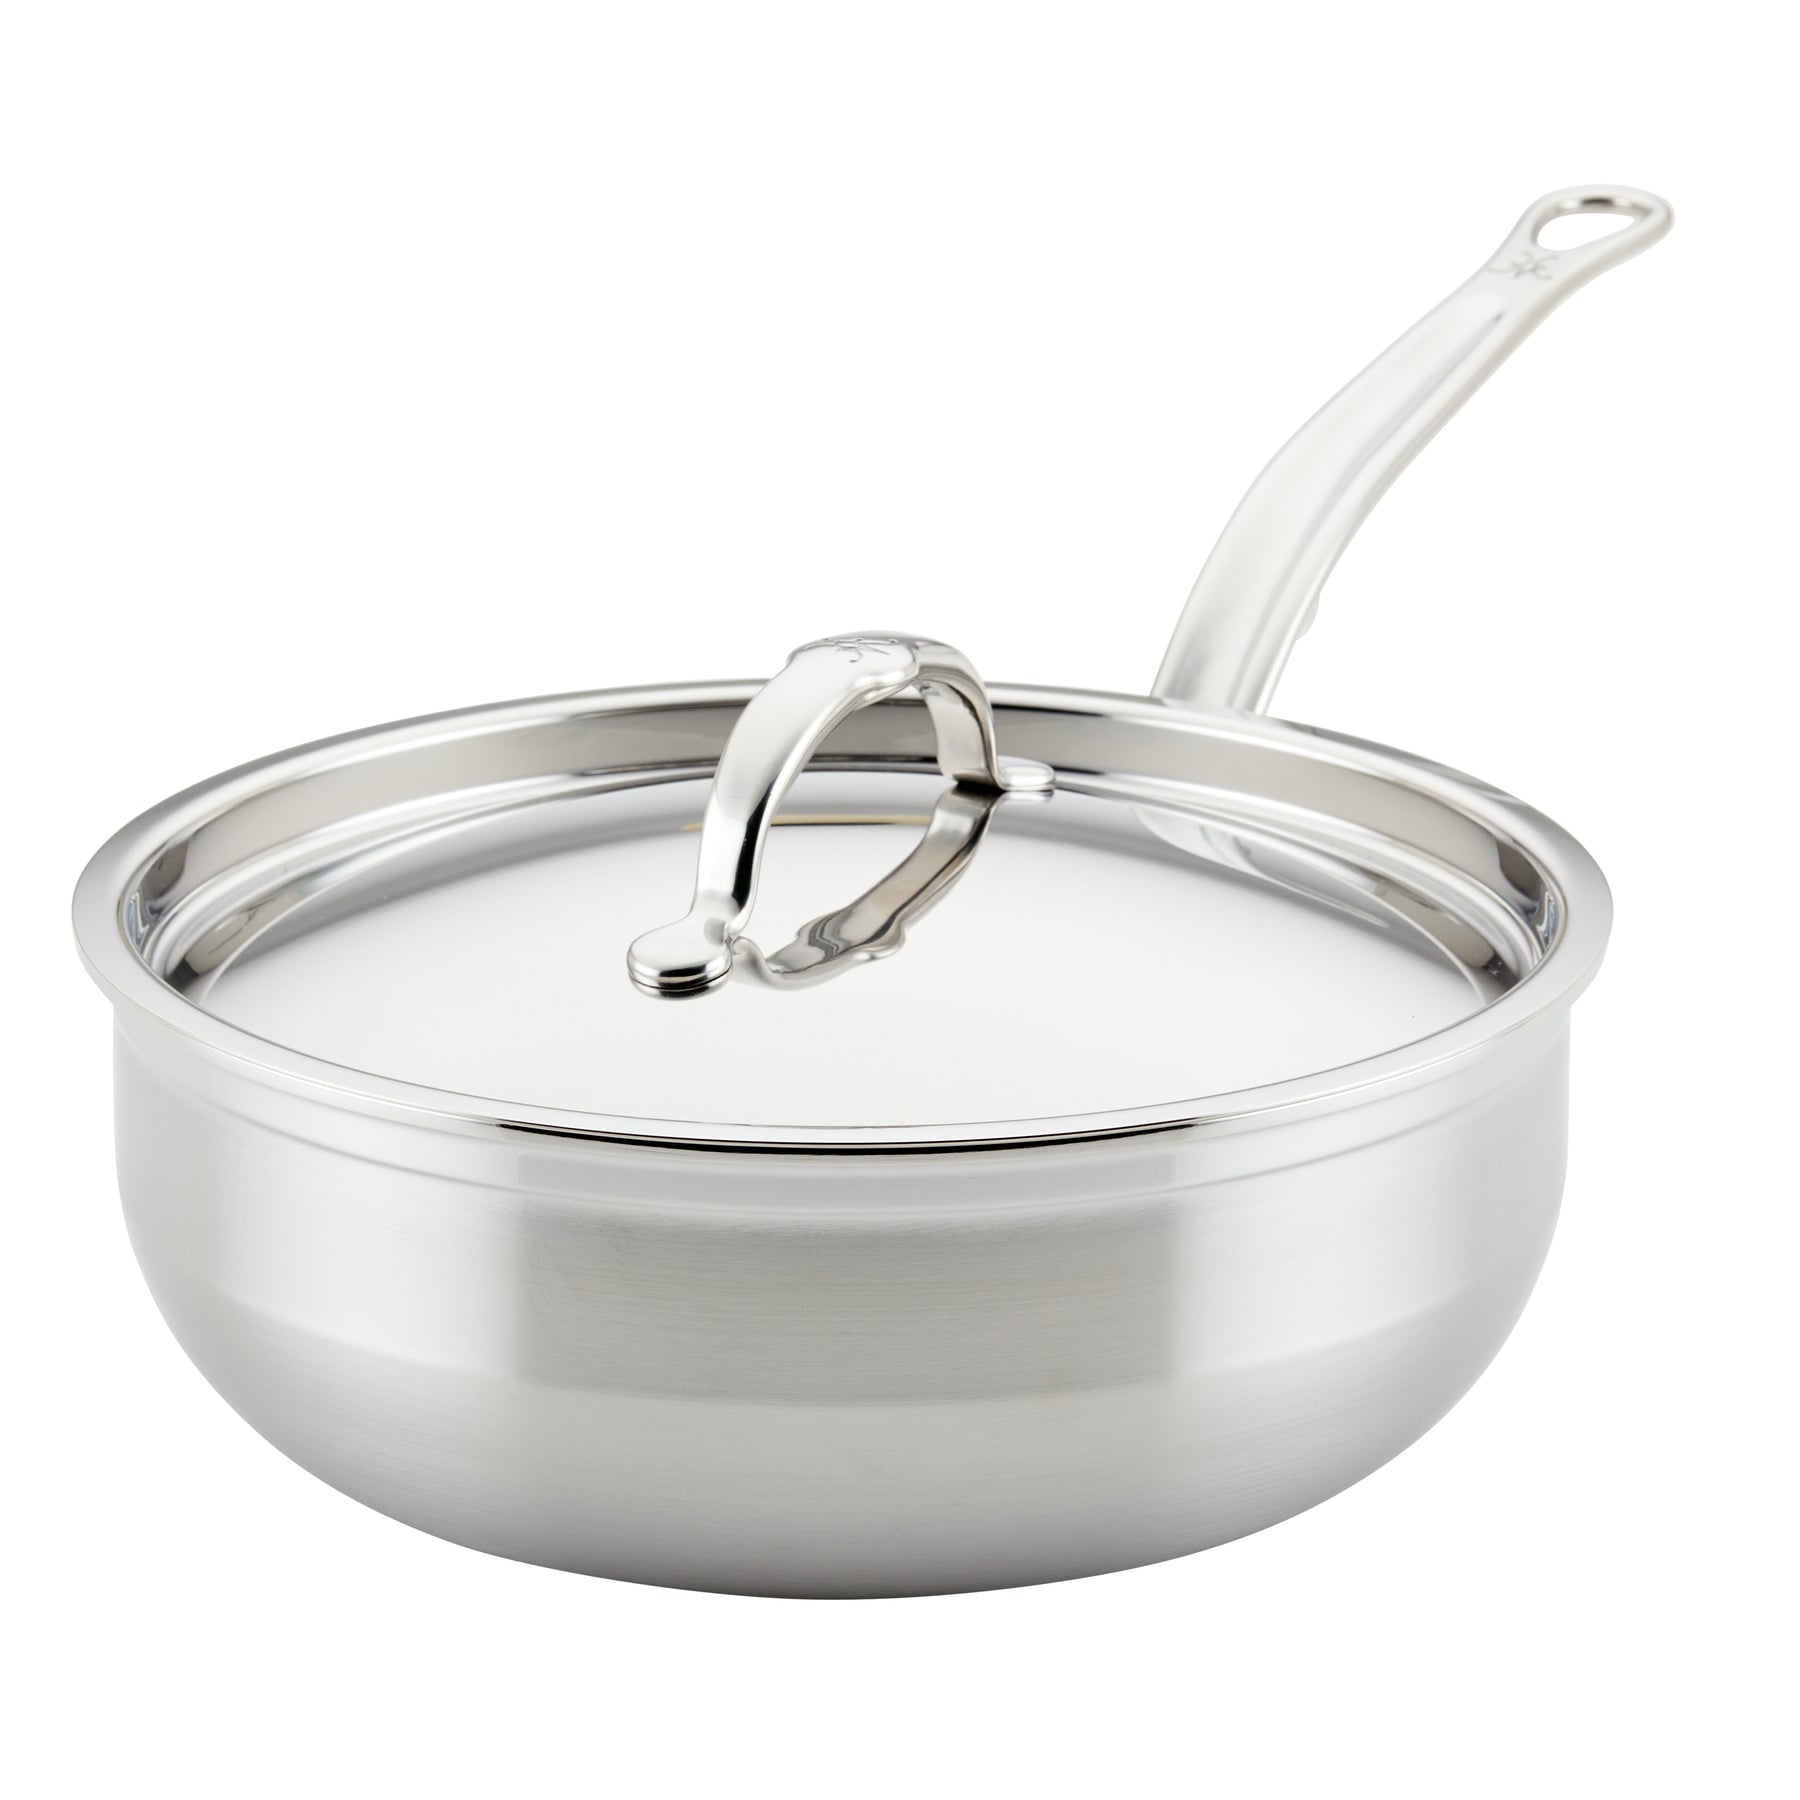 ProBond featured in Food Network's 5 Best Stainless Steel Cookware Se –  Hestan Culinary